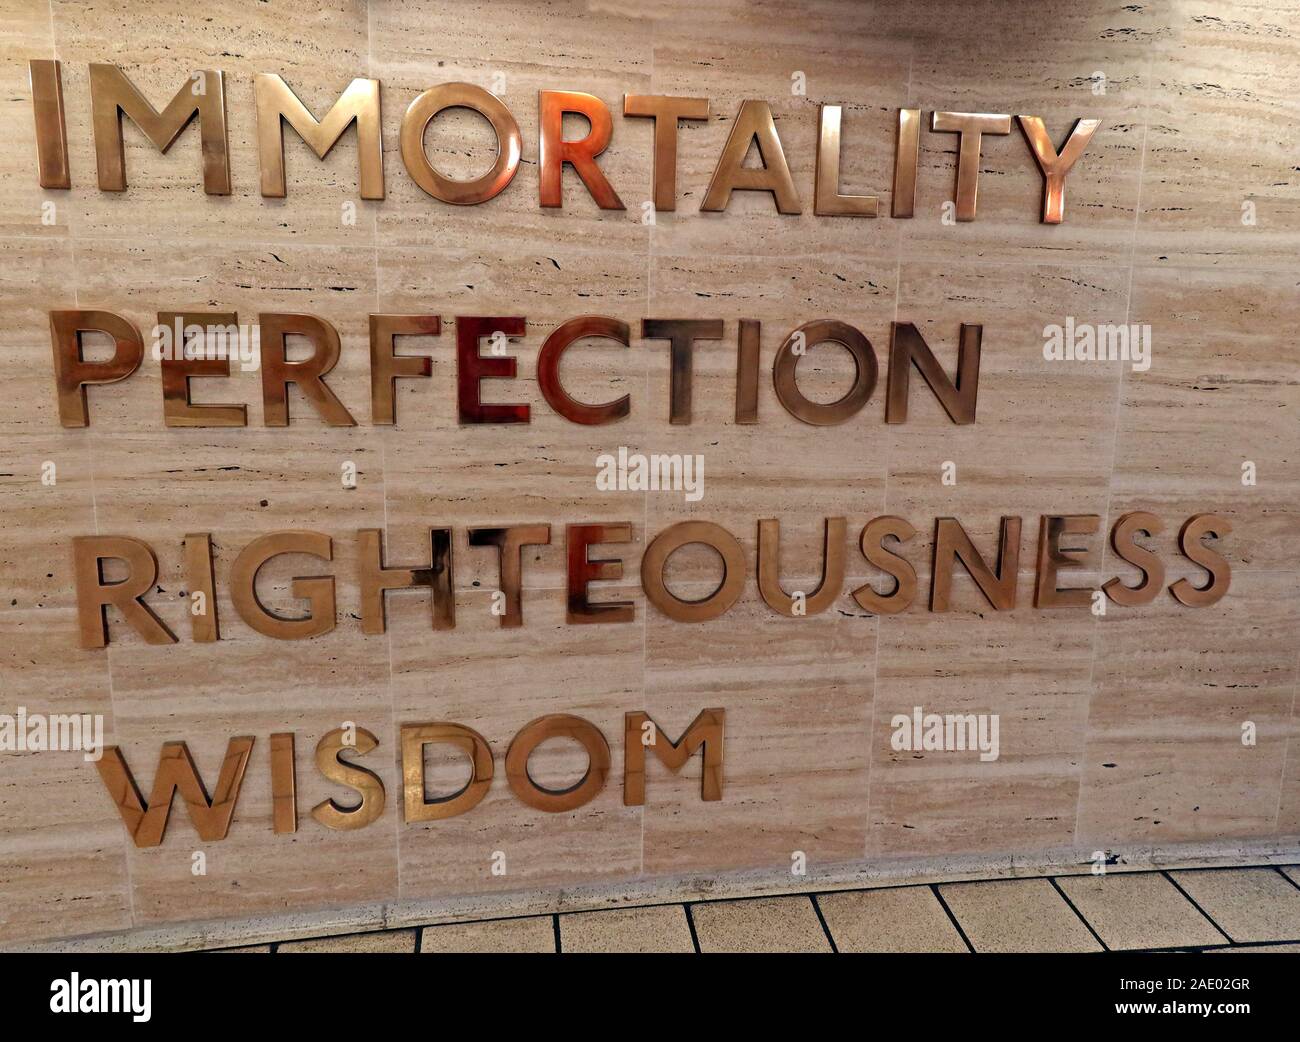 London Piccadilly tube station,Frank Pick,Immortality Perfection Righteousness Wisdom, London,England,UK Stock Photo